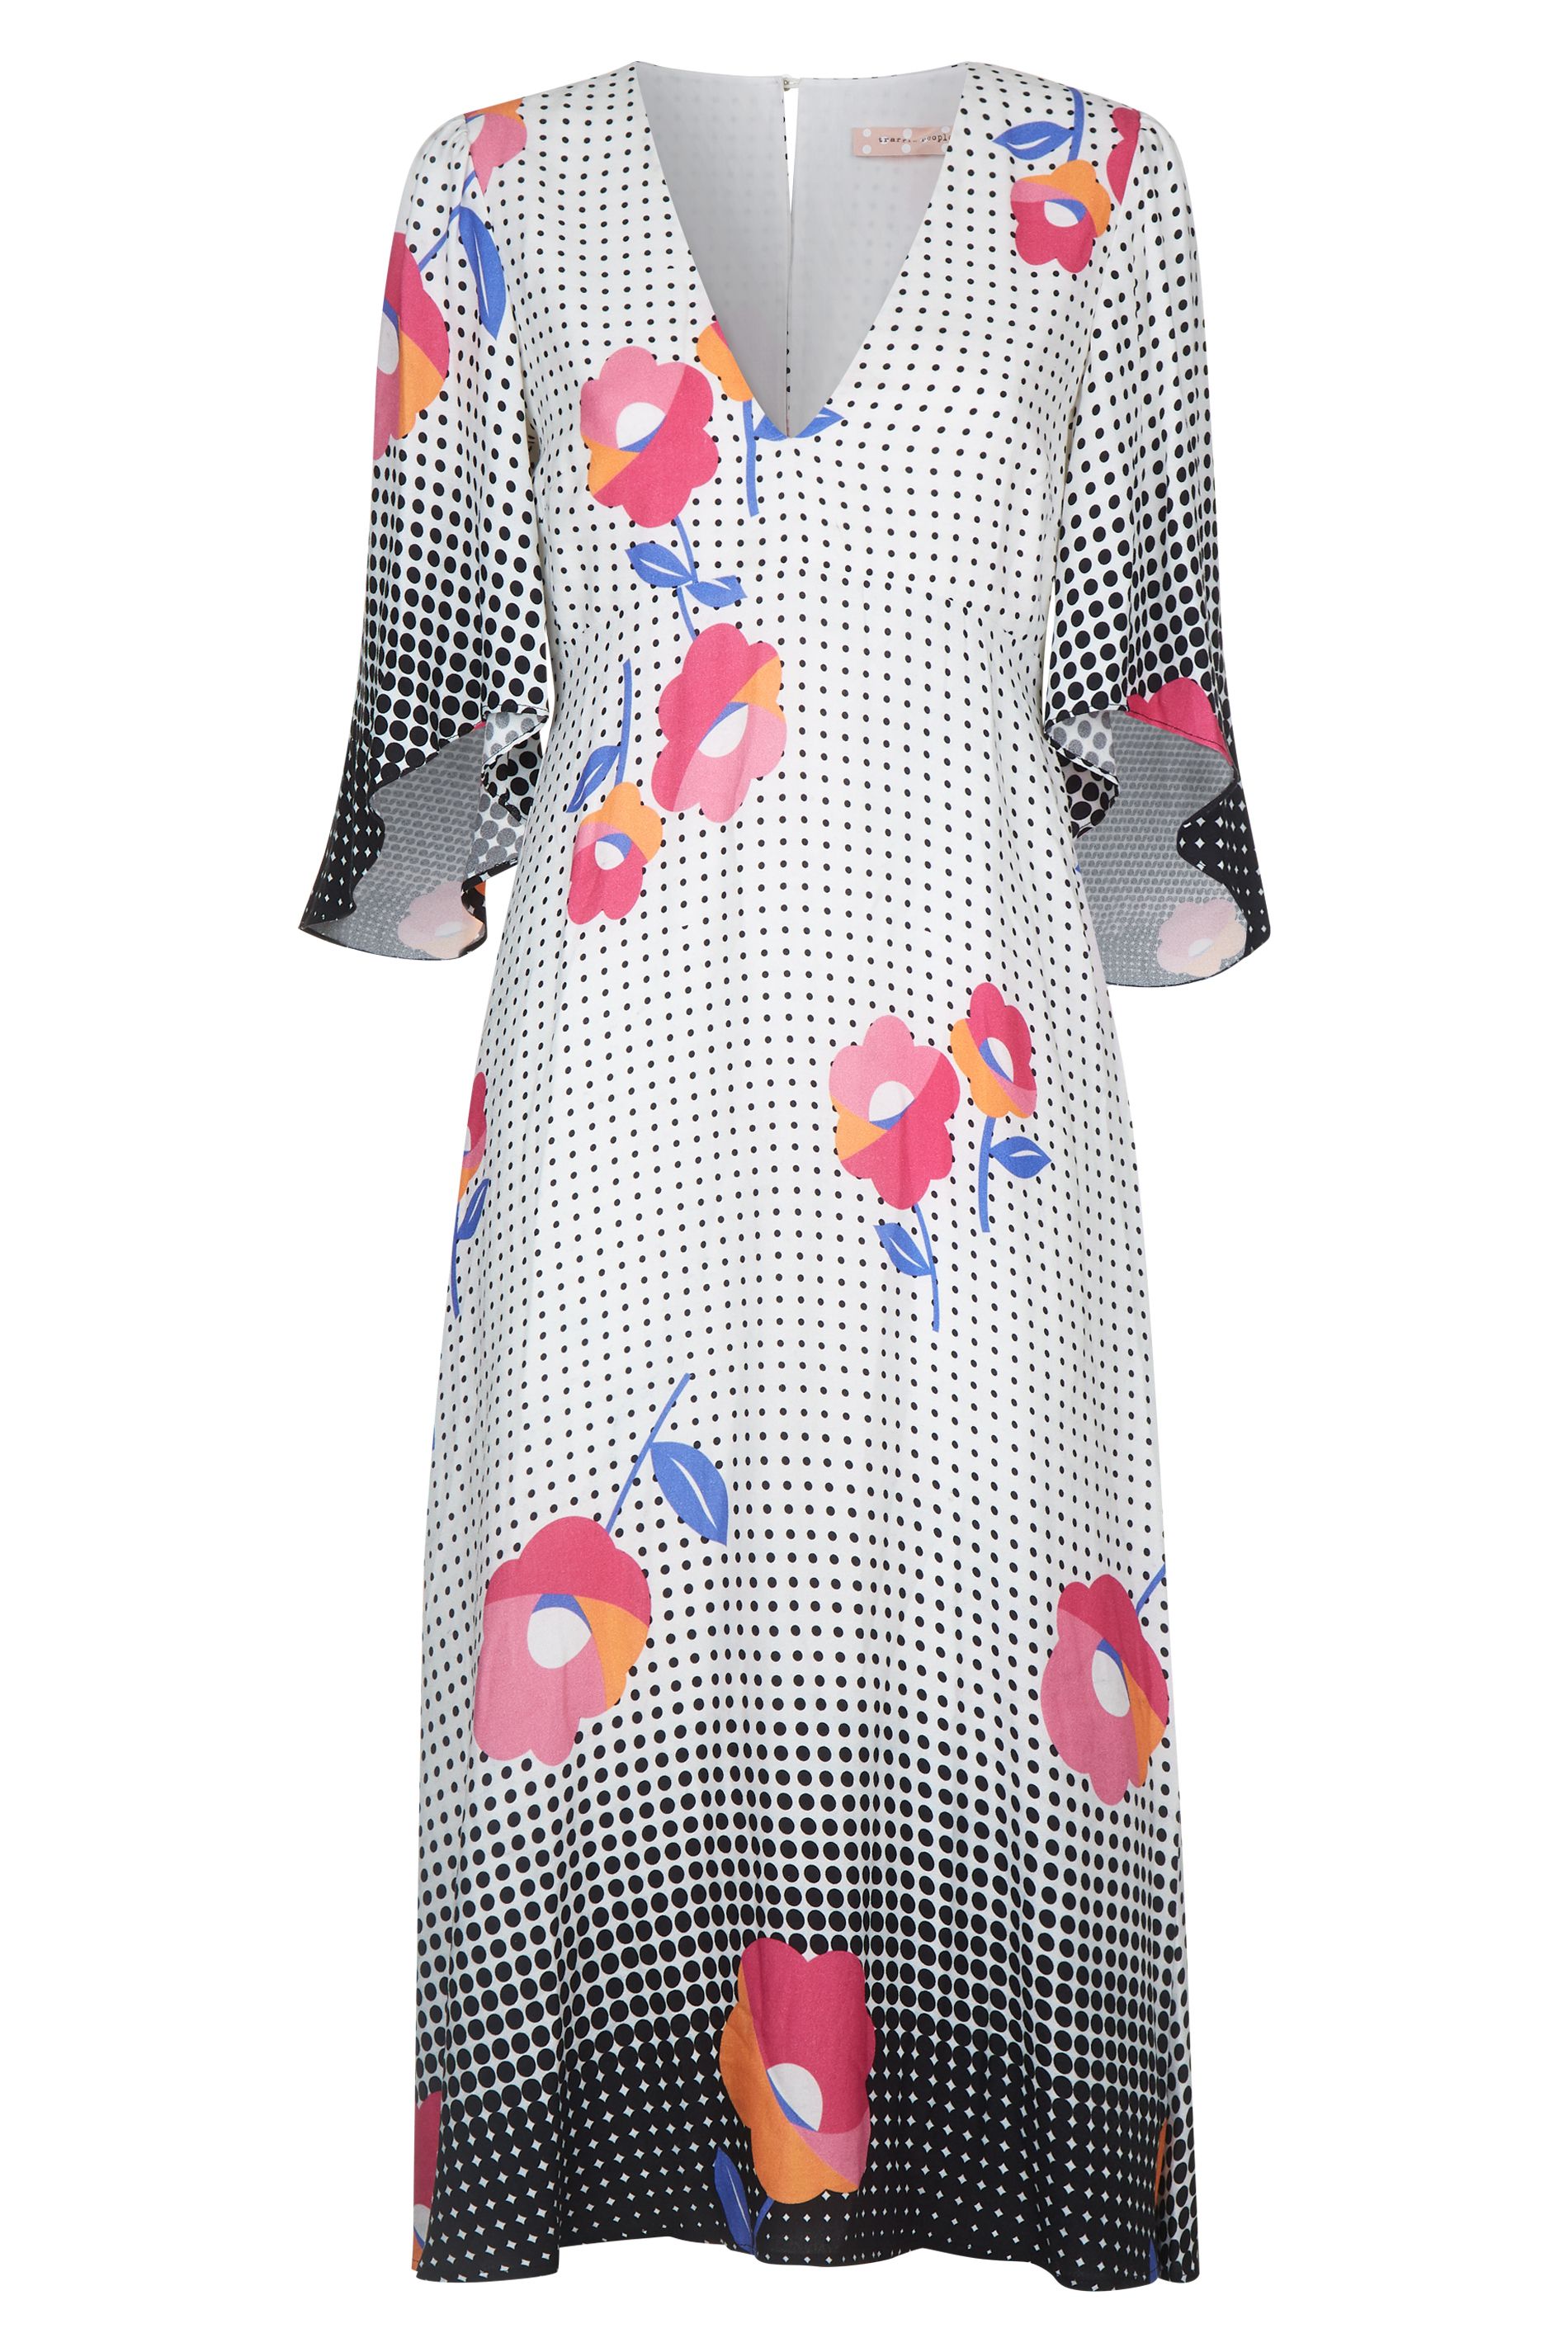 Embrace a mix of modern prints in the form of the elegant Blithe Dress. Featuring a fun seventies inspired floral print, this bias-cut midi floral dress with sleeves also boasts feminine fluted sleeves and a flattering V-neckline 100% Viscose Machine Wash at 30 Degrees using a delicate cycle